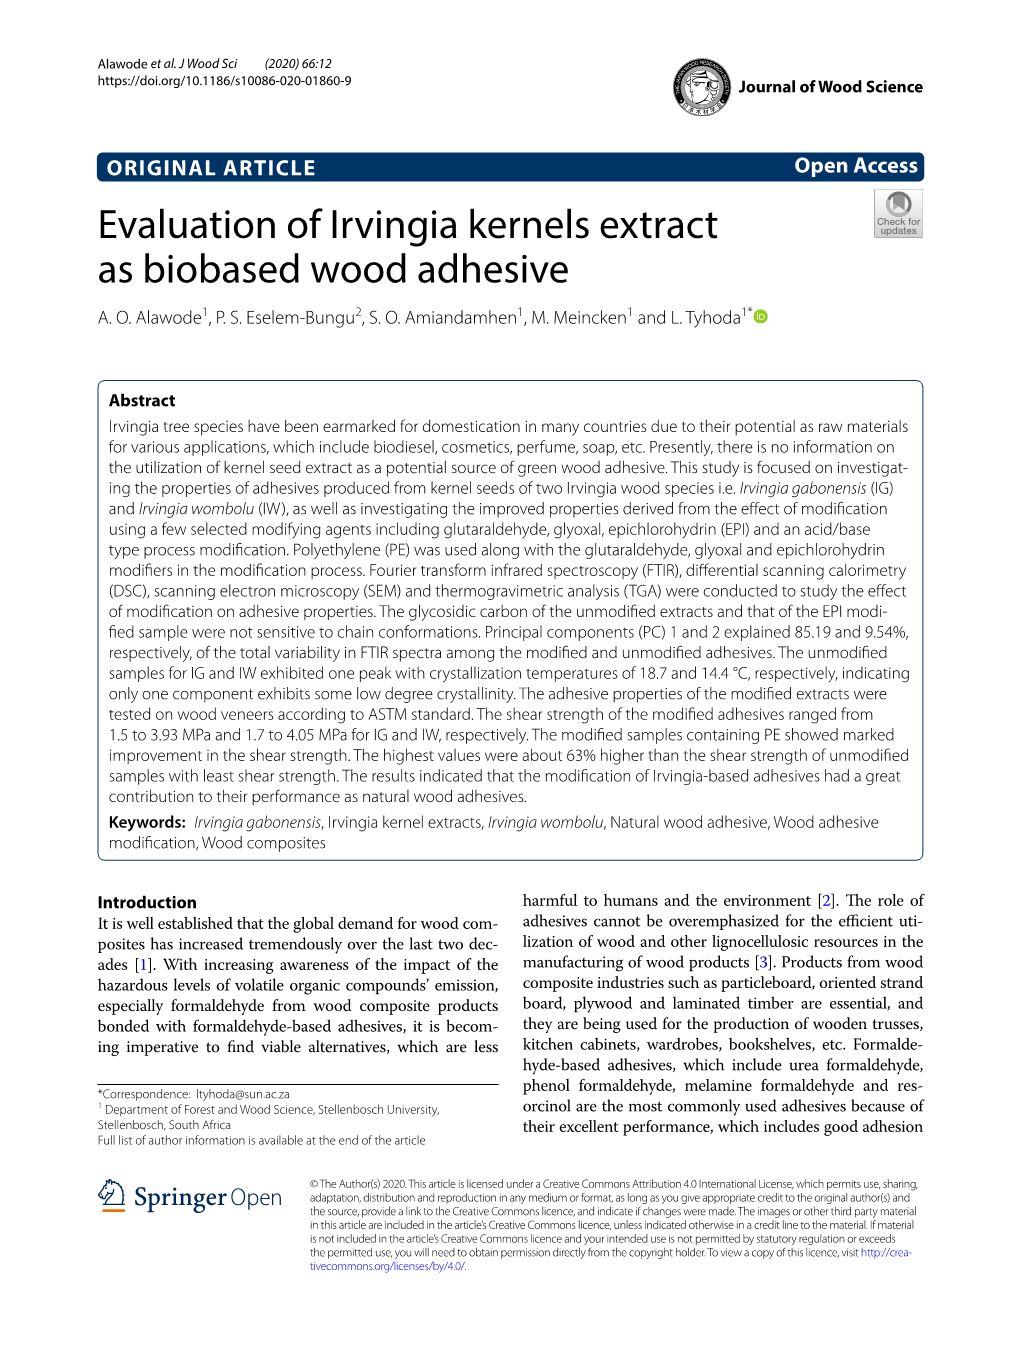 Evaluation of Irvingia Kernels Extract As Biobased Wood Adhesive A